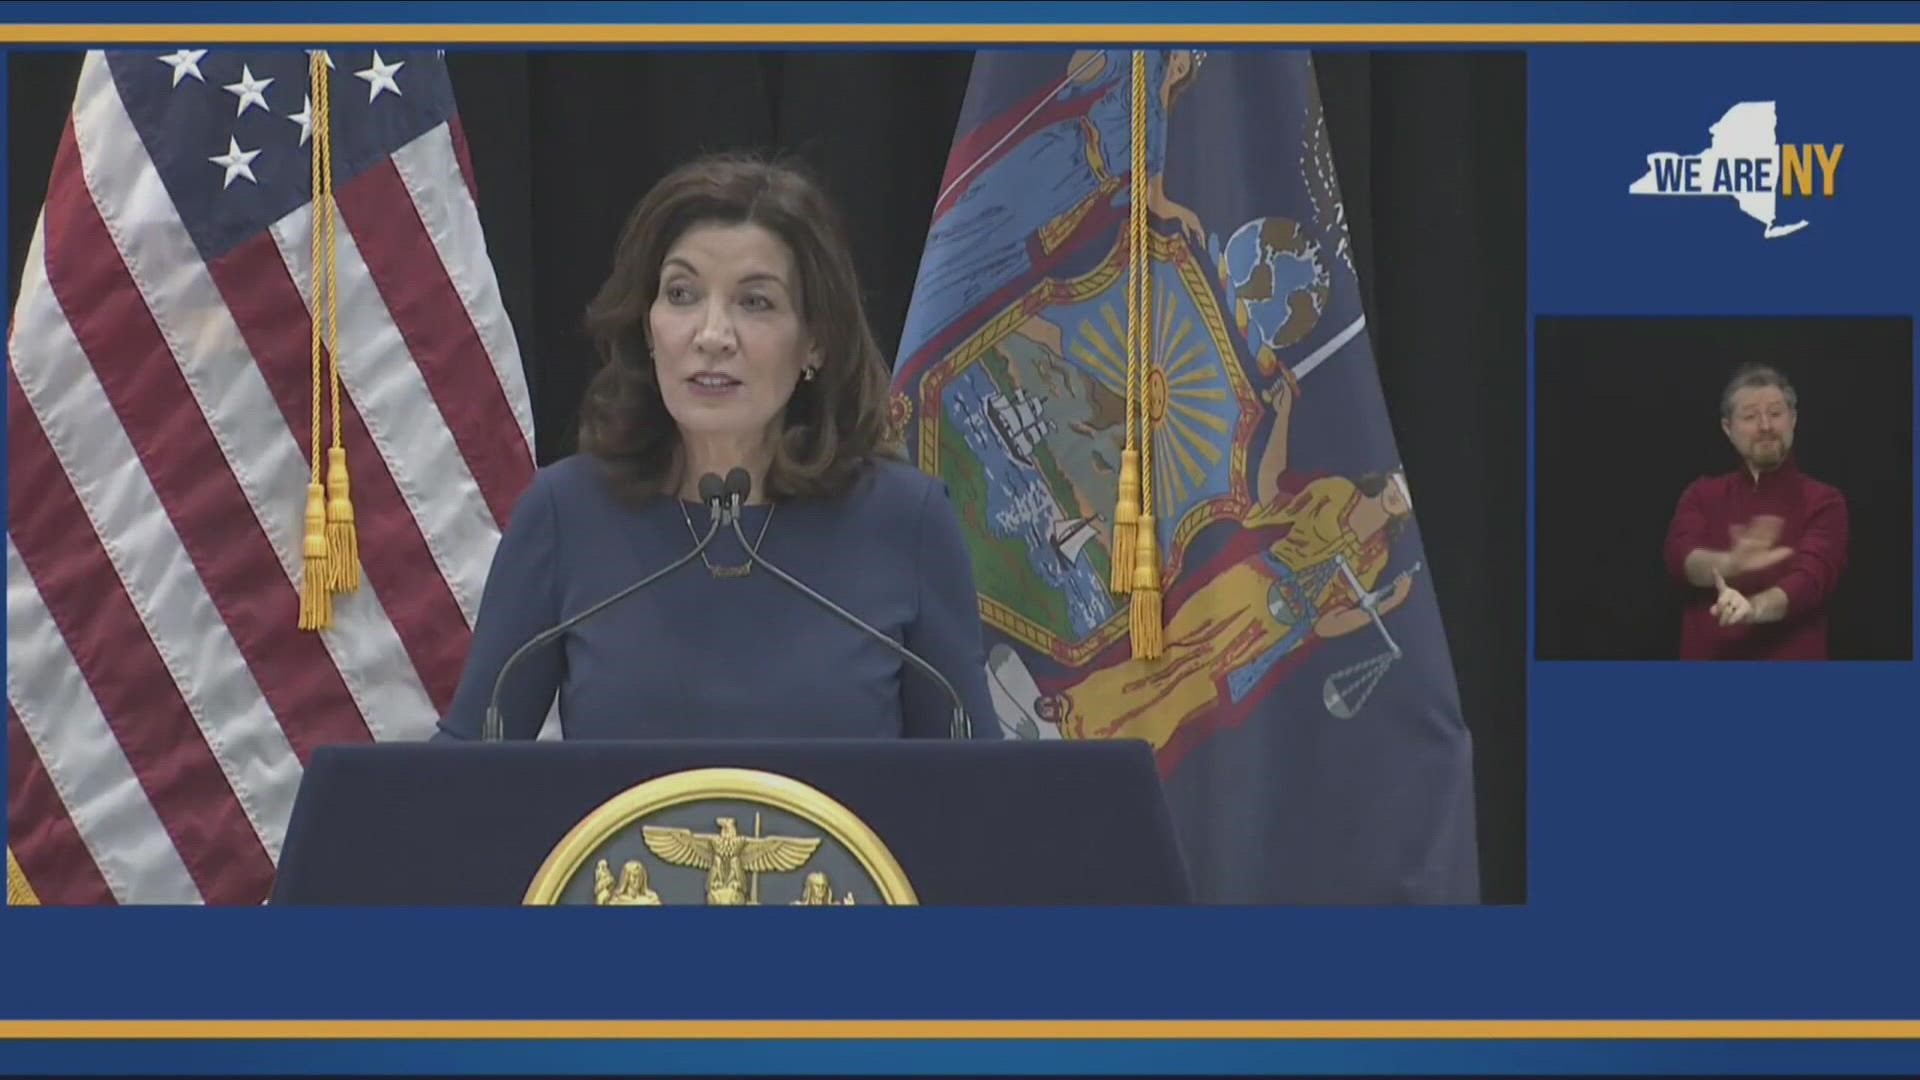 Gov. Hochul told reporters that she is comfortable with the decision that republicans have been demanding for several months.